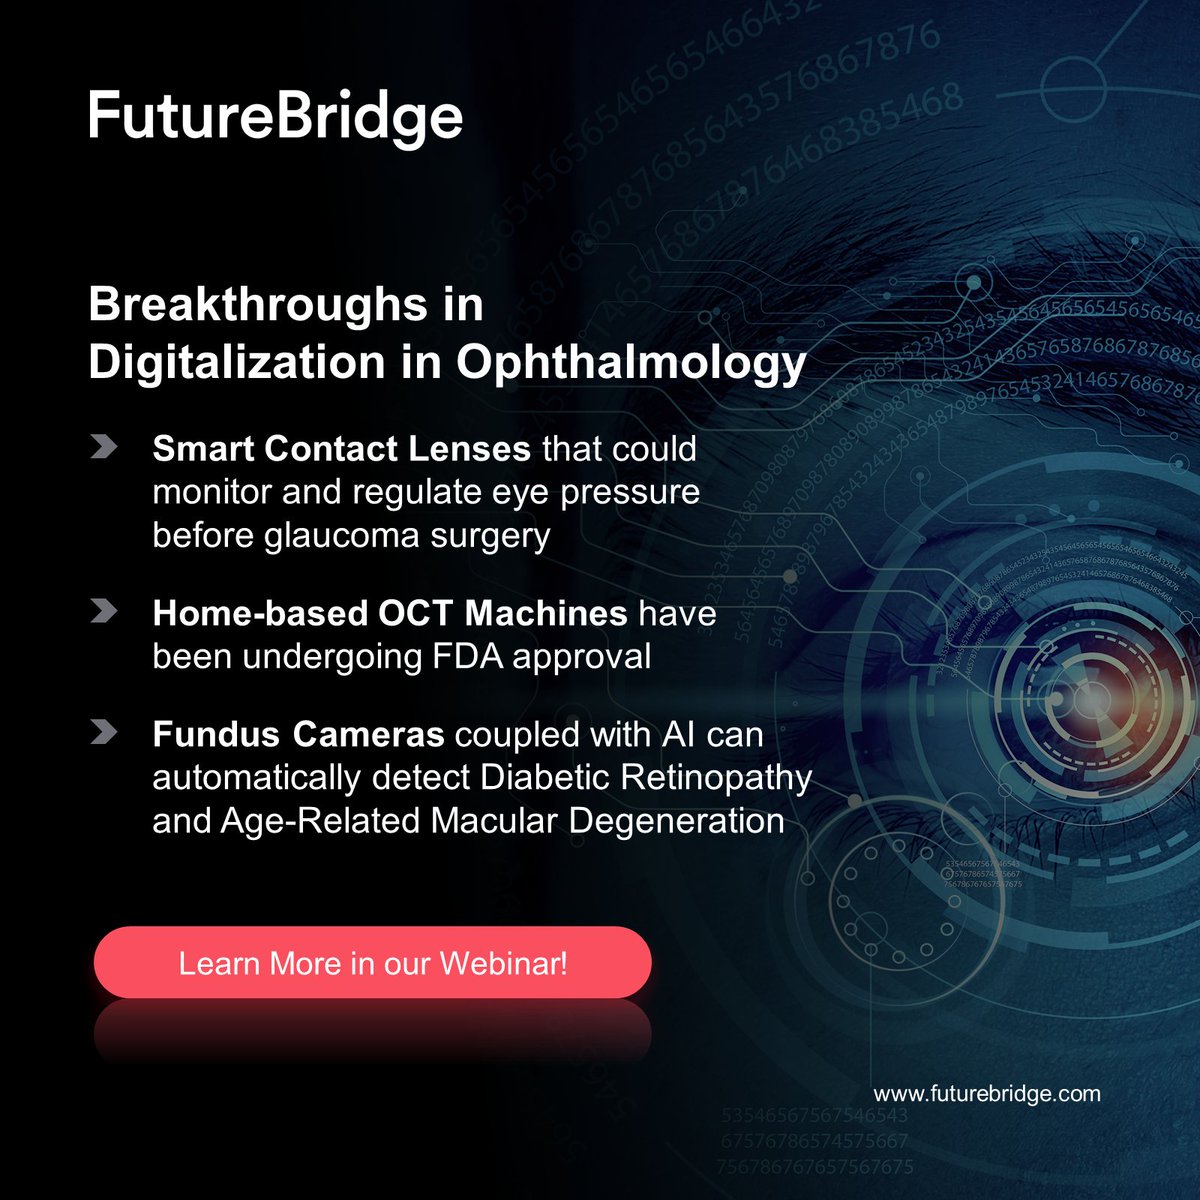 Explore how Smart Contact Lenses, Home-based OCT Machines, Fundus Cameras, and digitalization are reshaping the ophthalmology field in this webinar.

Register here: bit.ly/3DZ9fdp

#Ophthalmology #Healthcare #Innovation #OphthalmicDevice #TechForesight